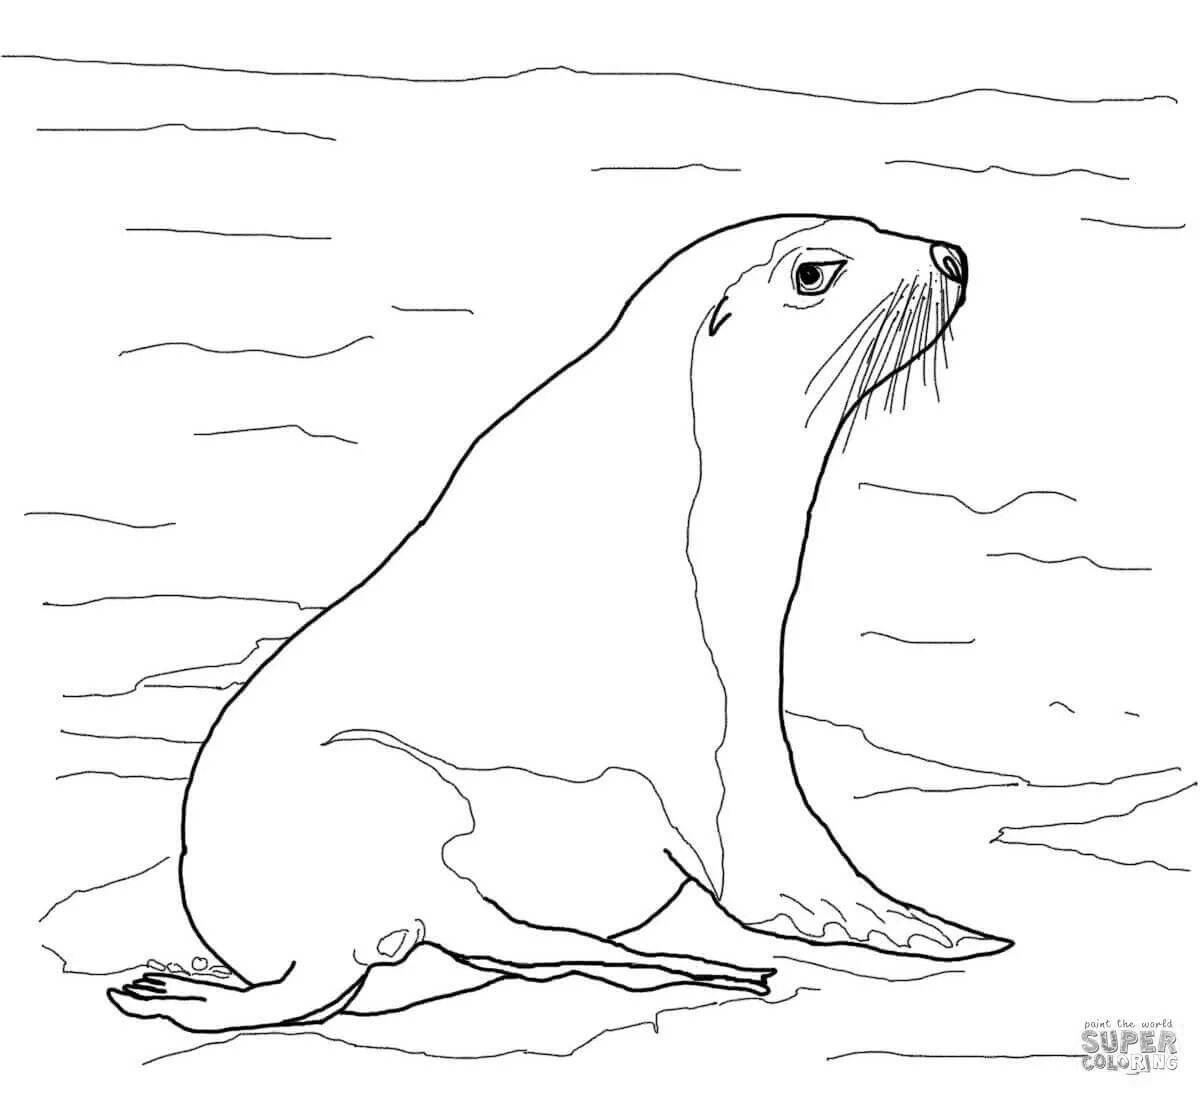 Adorable Antarctic coloring book for 6-7 year olds